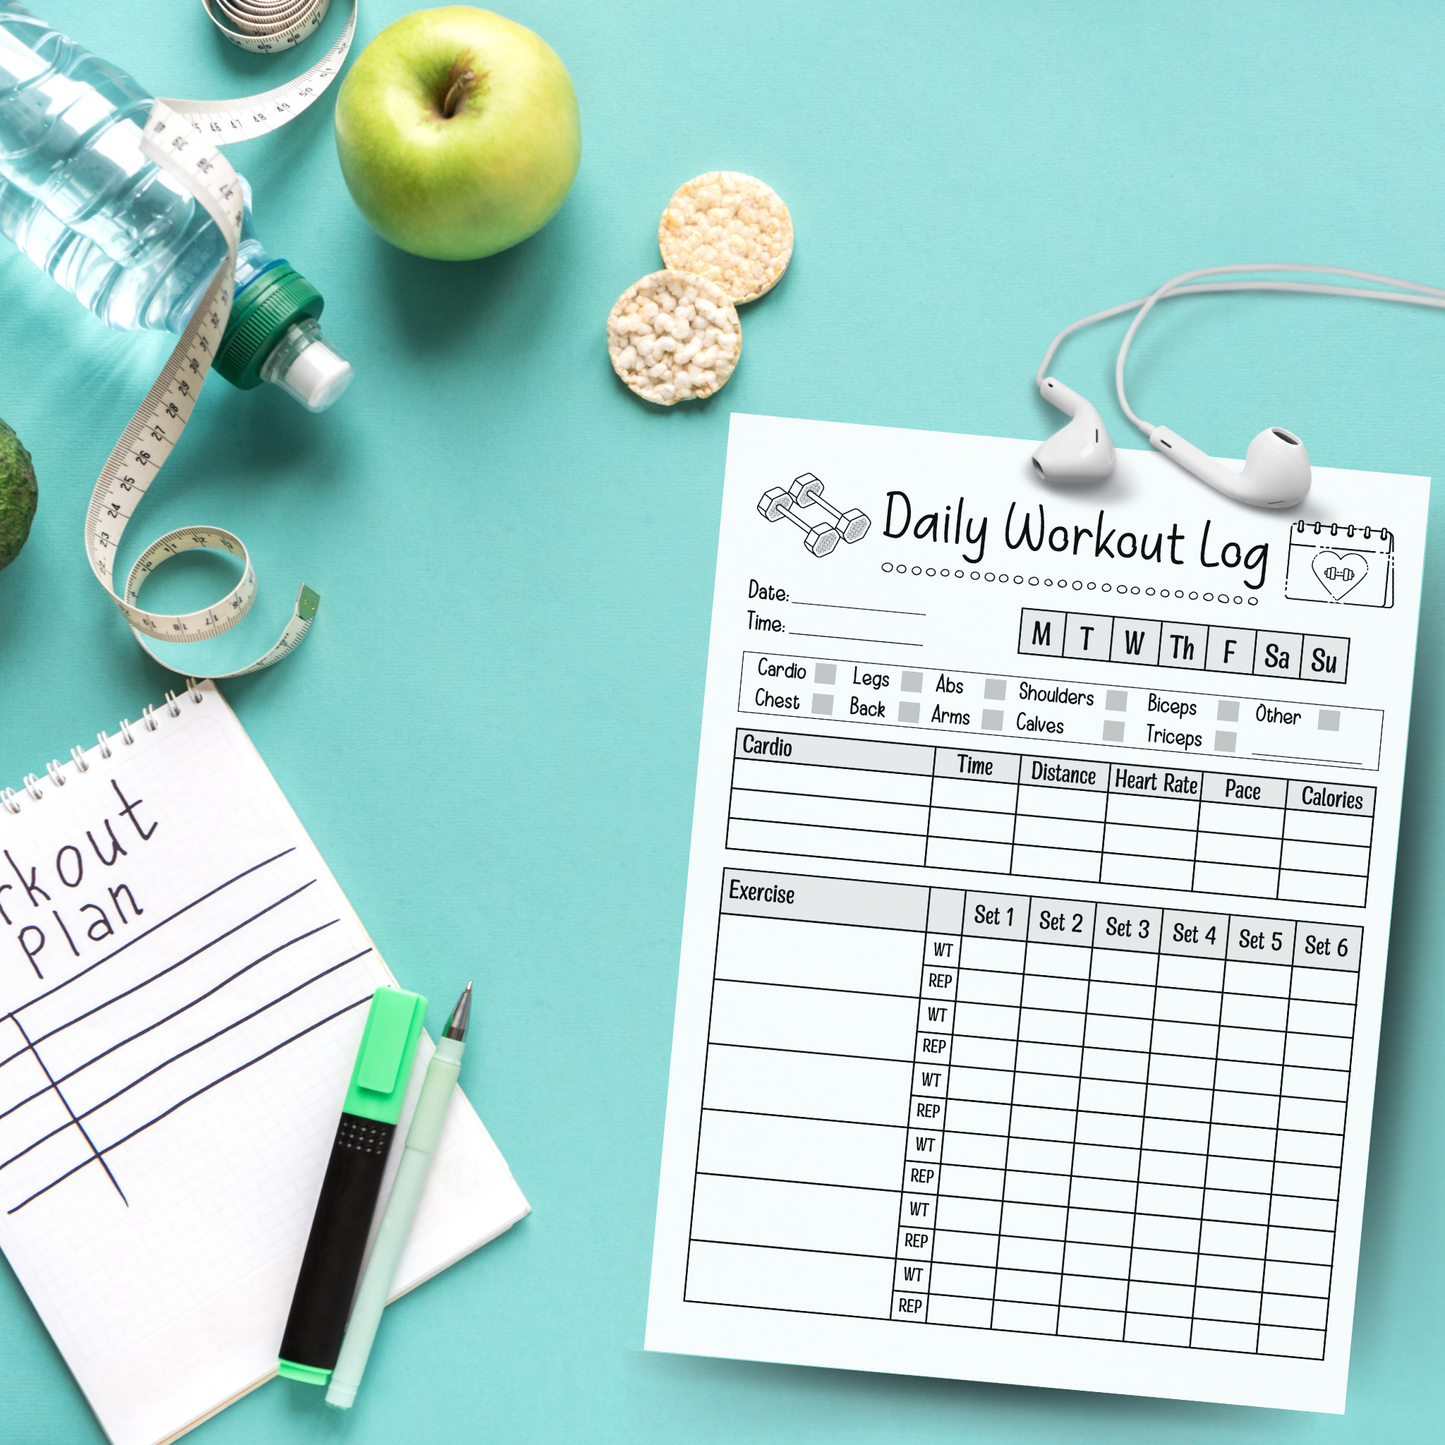 Daily Workout Log Printable Exercise Planner, Gym Training Tracker